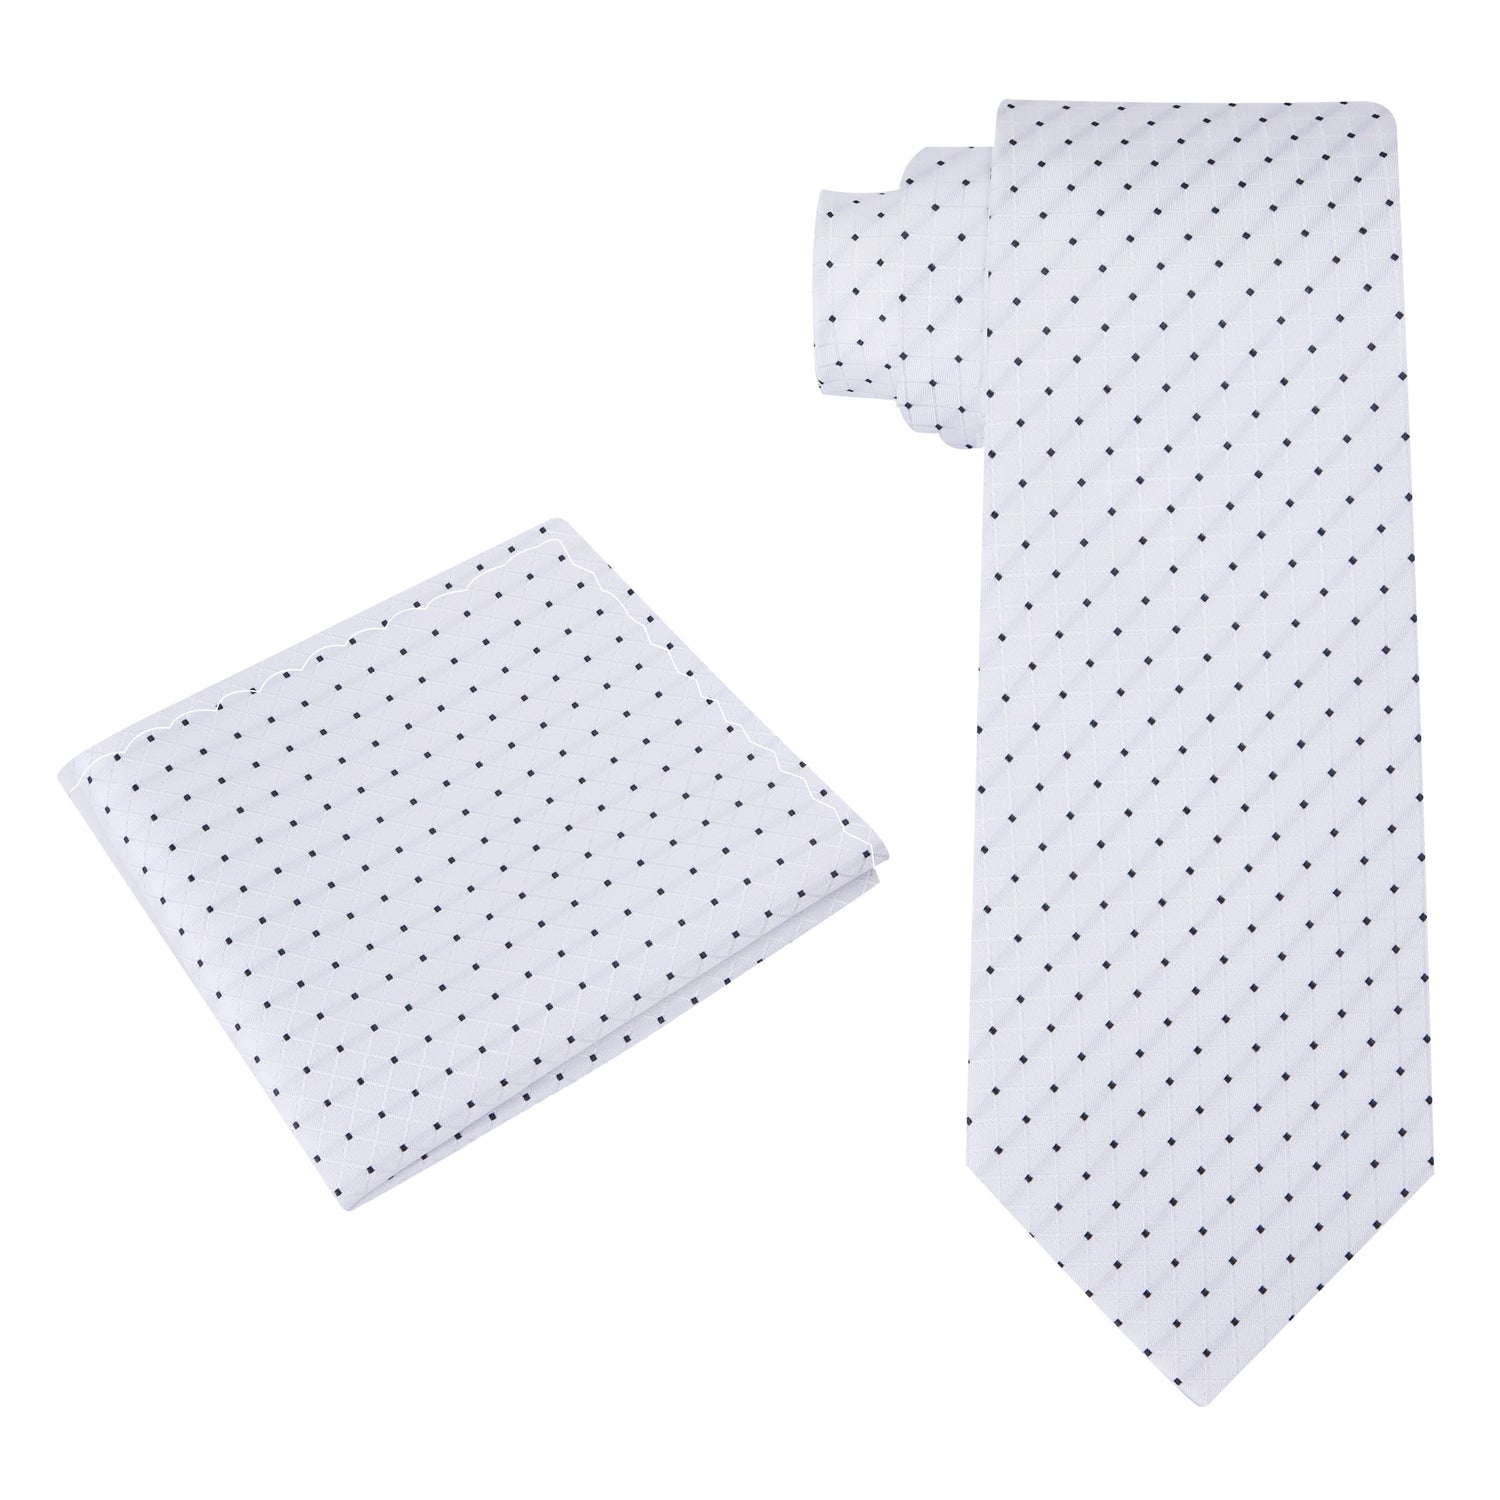 View 2: A White With Black Geometric Dots Pattern Silk Necktie With Matching Pocket Square